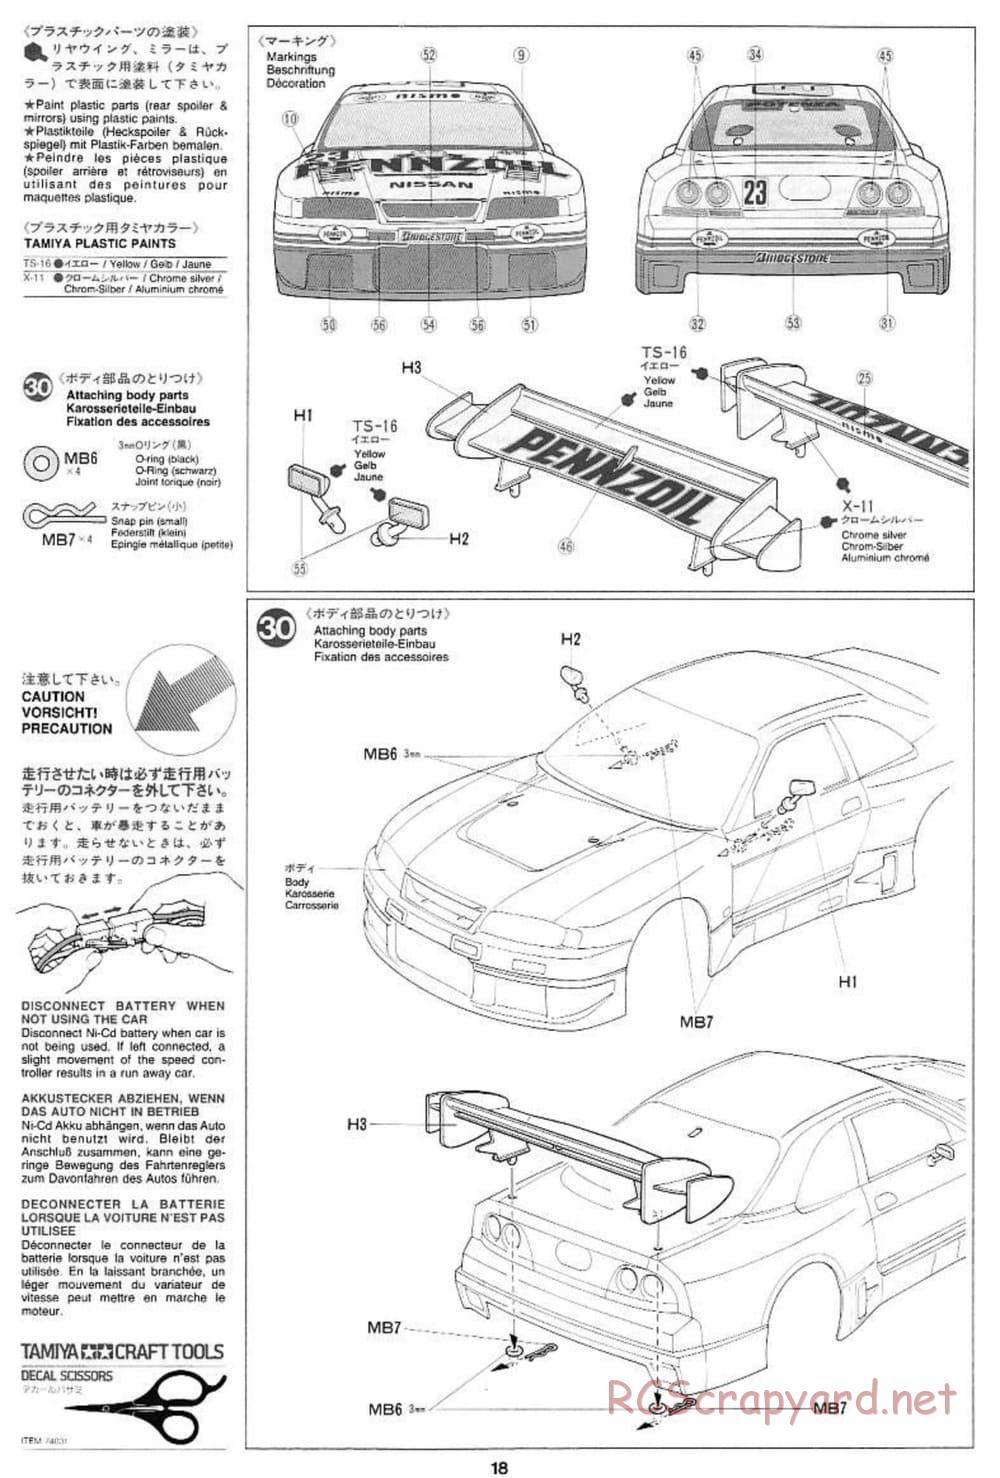 Tamiya - Pennzoil Nismo GT-R - TL-01 Chassis - Manual - Page 18